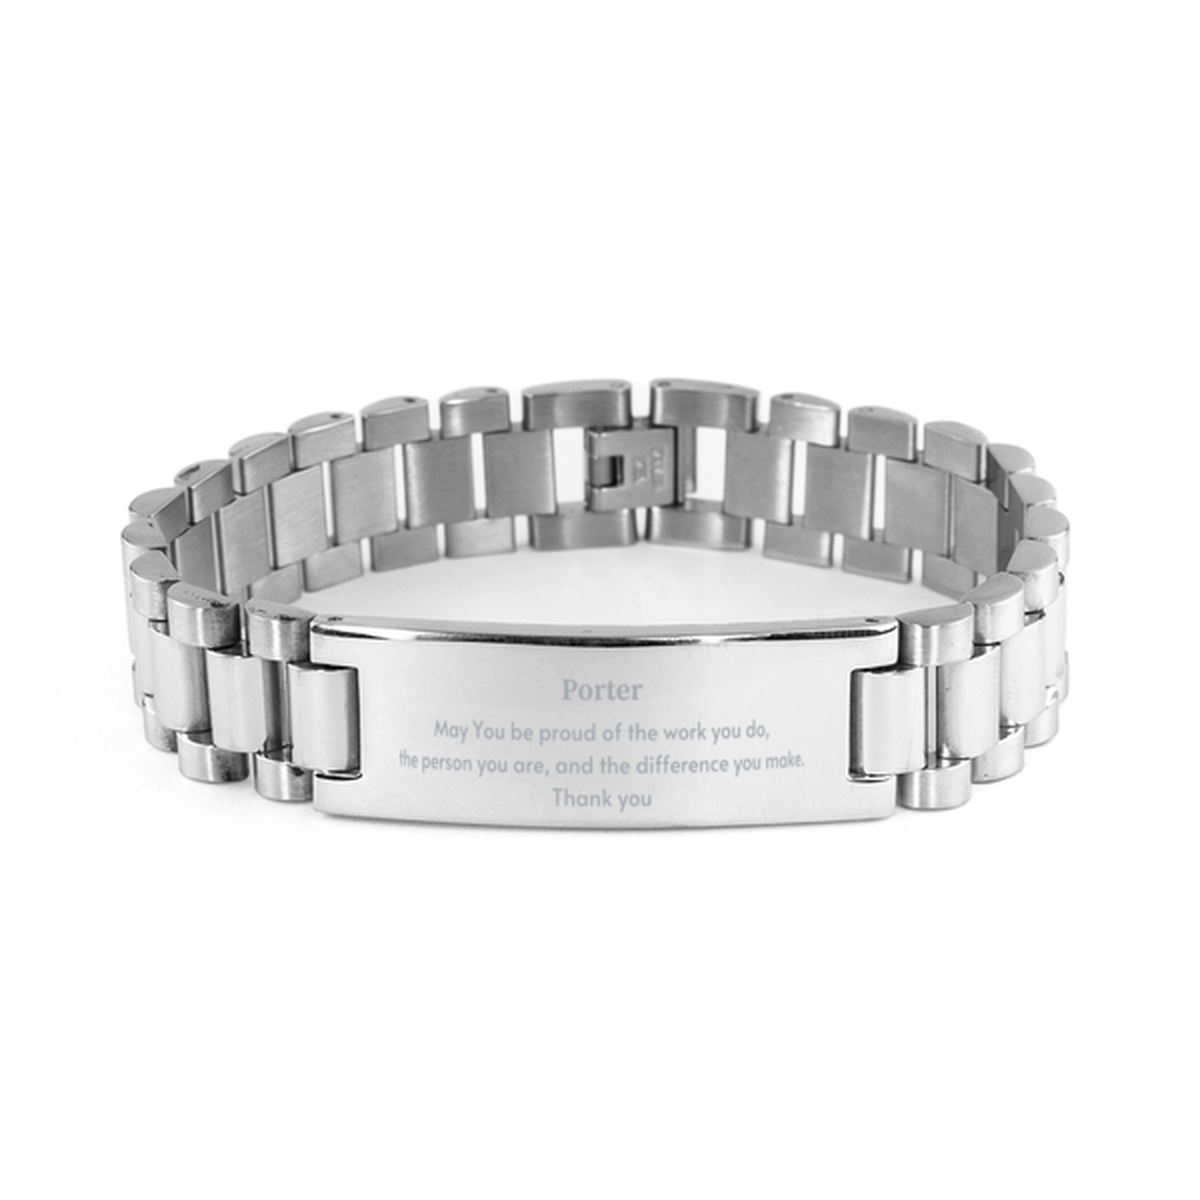 Heartwarming Ladder Stainless Steel Bracelet Retirement Coworkers Gifts for Porter, Porter May You be proud of the work you do, the person you are Gifts for Boss Men Women Friends